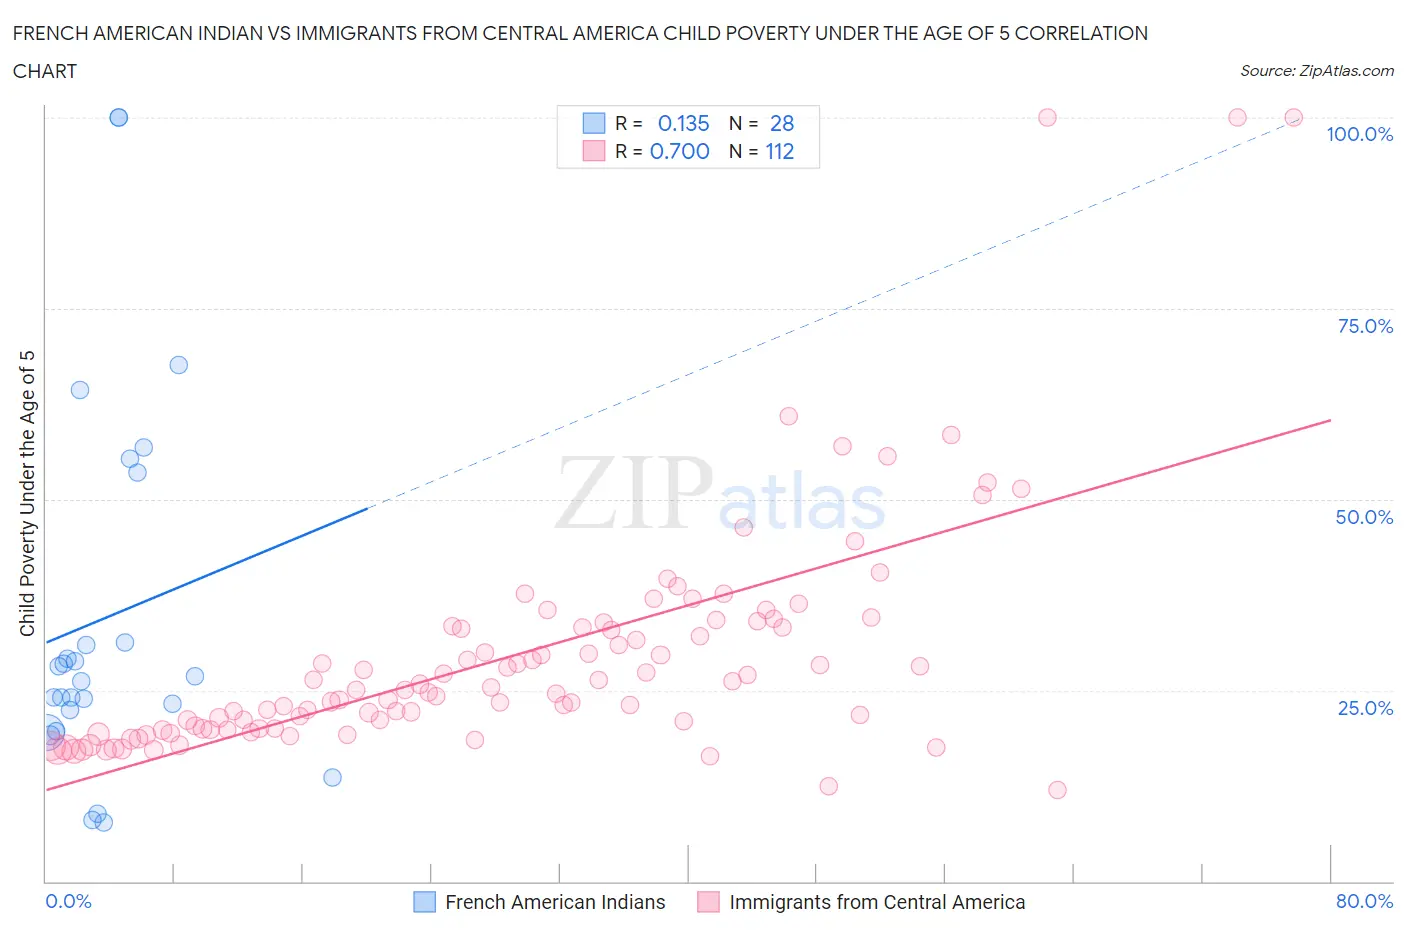 French American Indian vs Immigrants from Central America Child Poverty Under the Age of 5